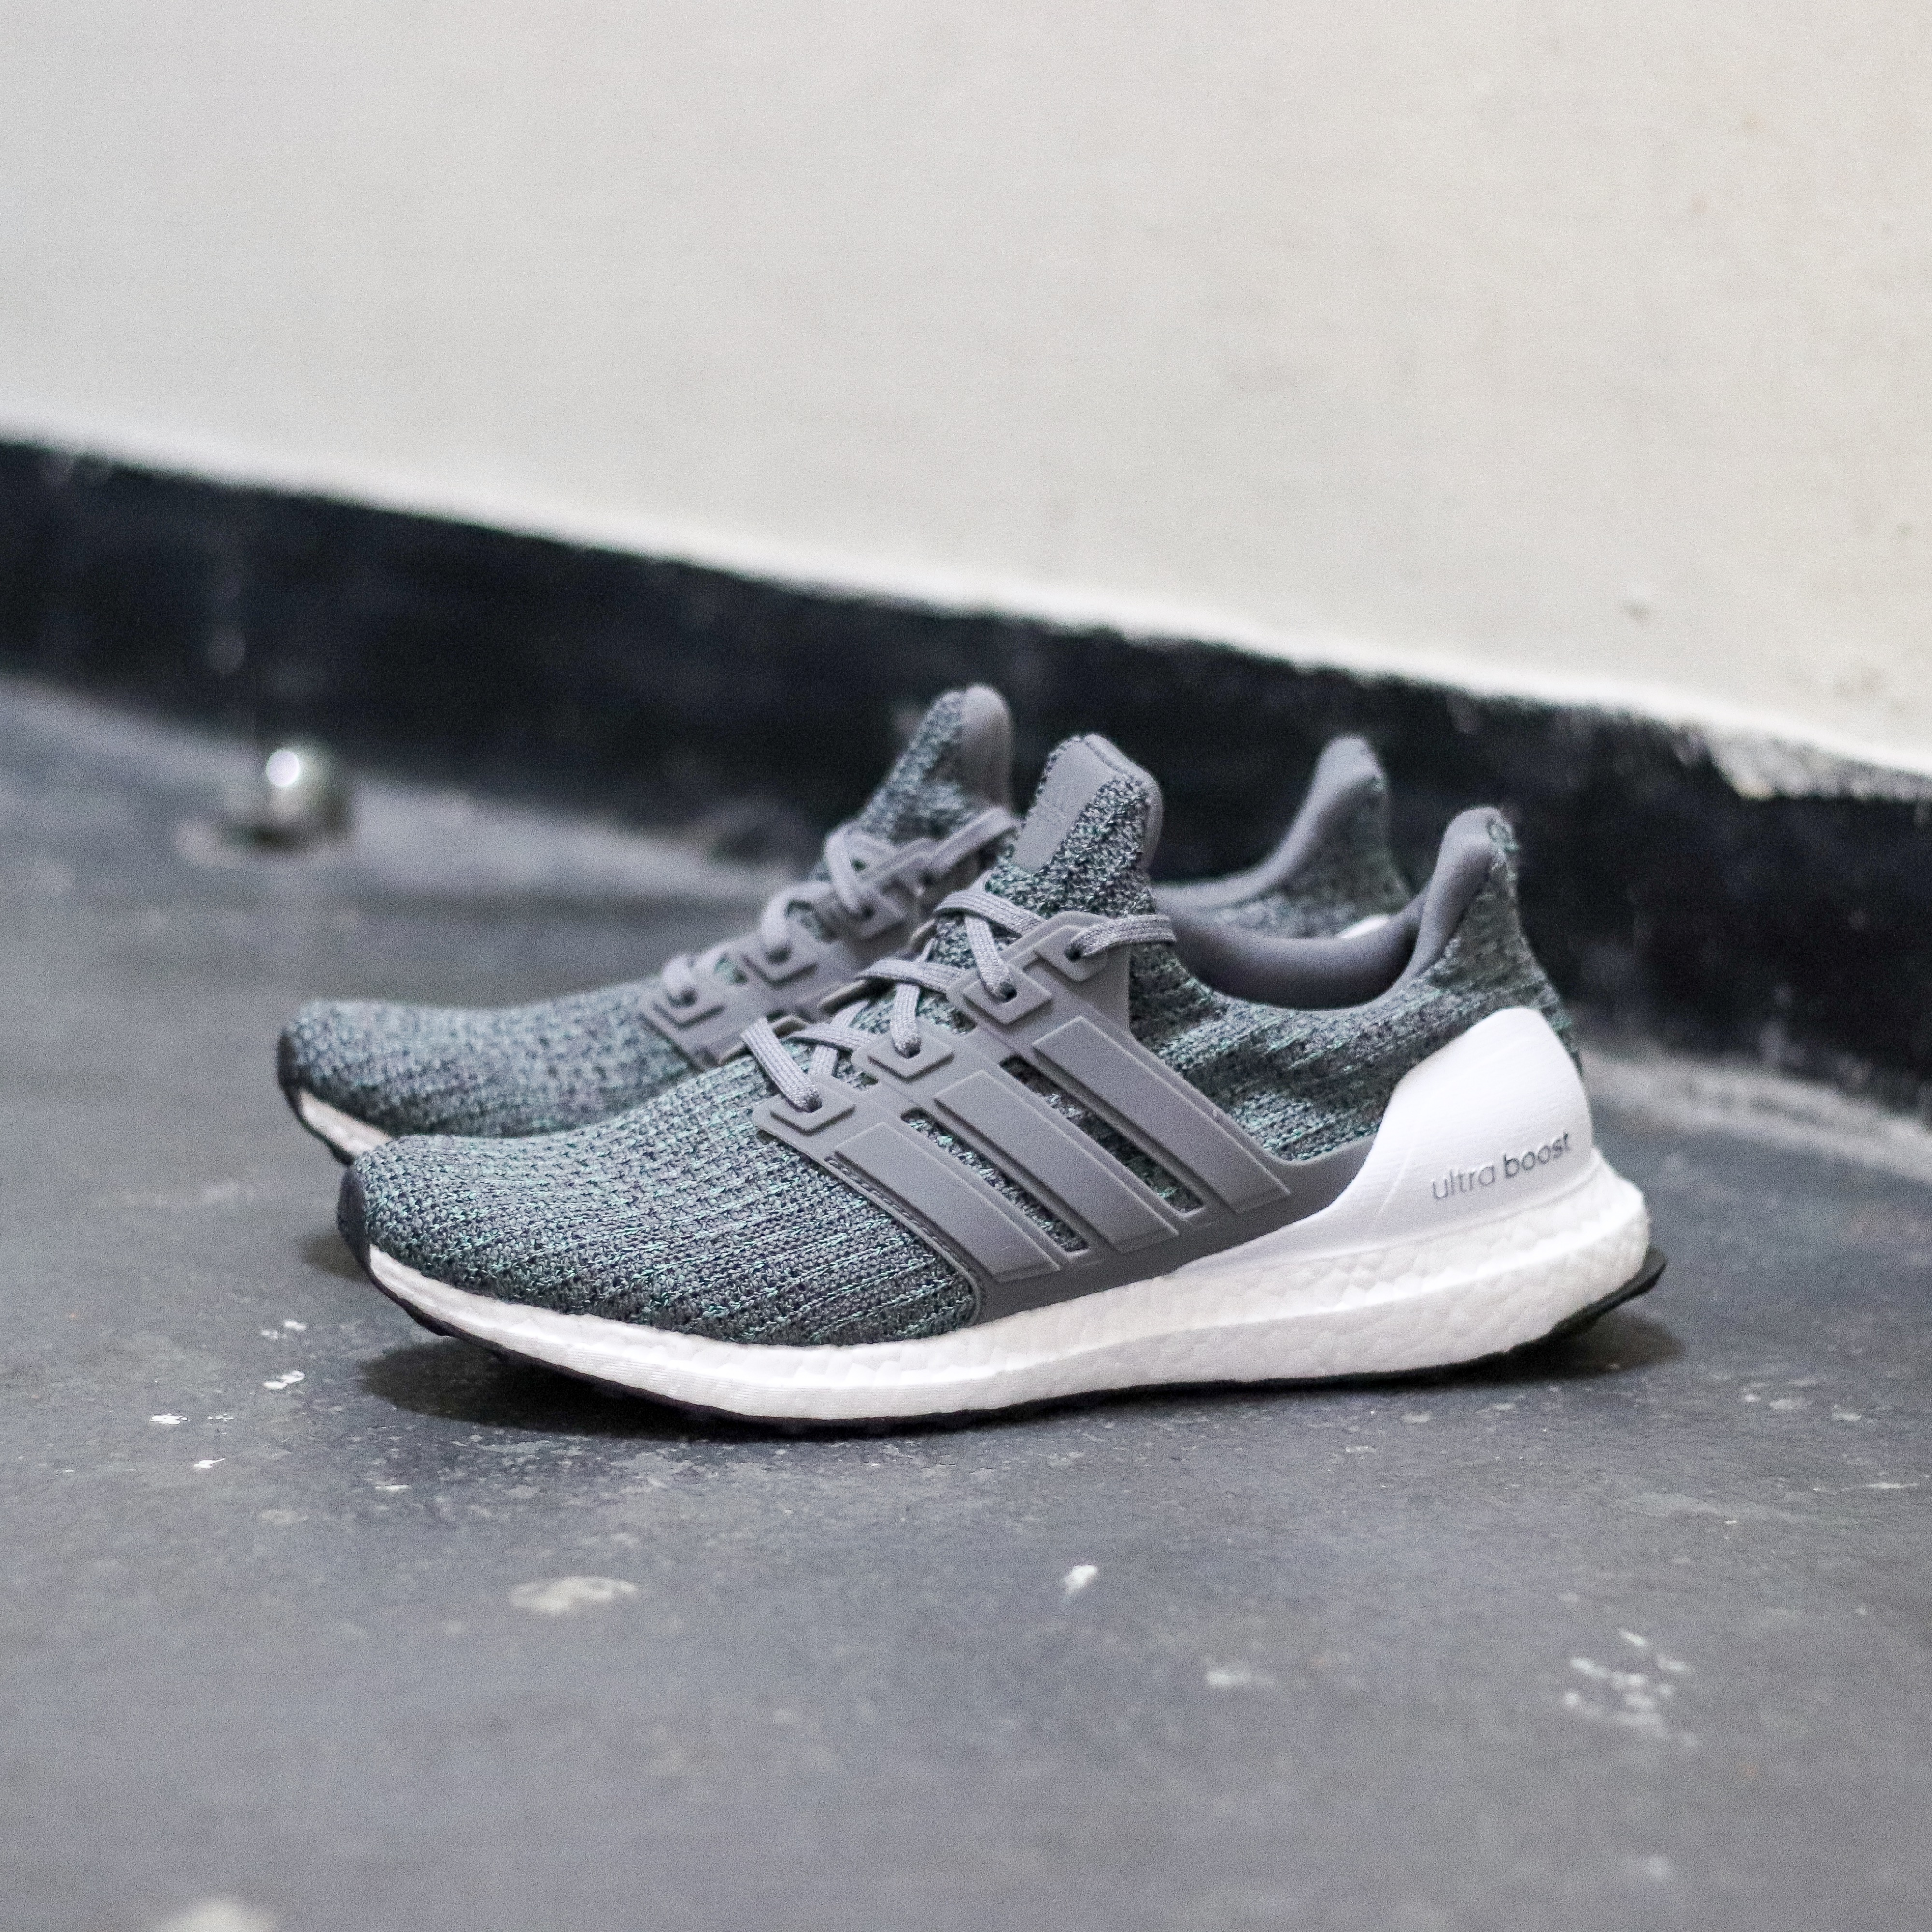 adidas Ultra Boost 3.0 LTD Mid Grey Leather Cage Kick Game